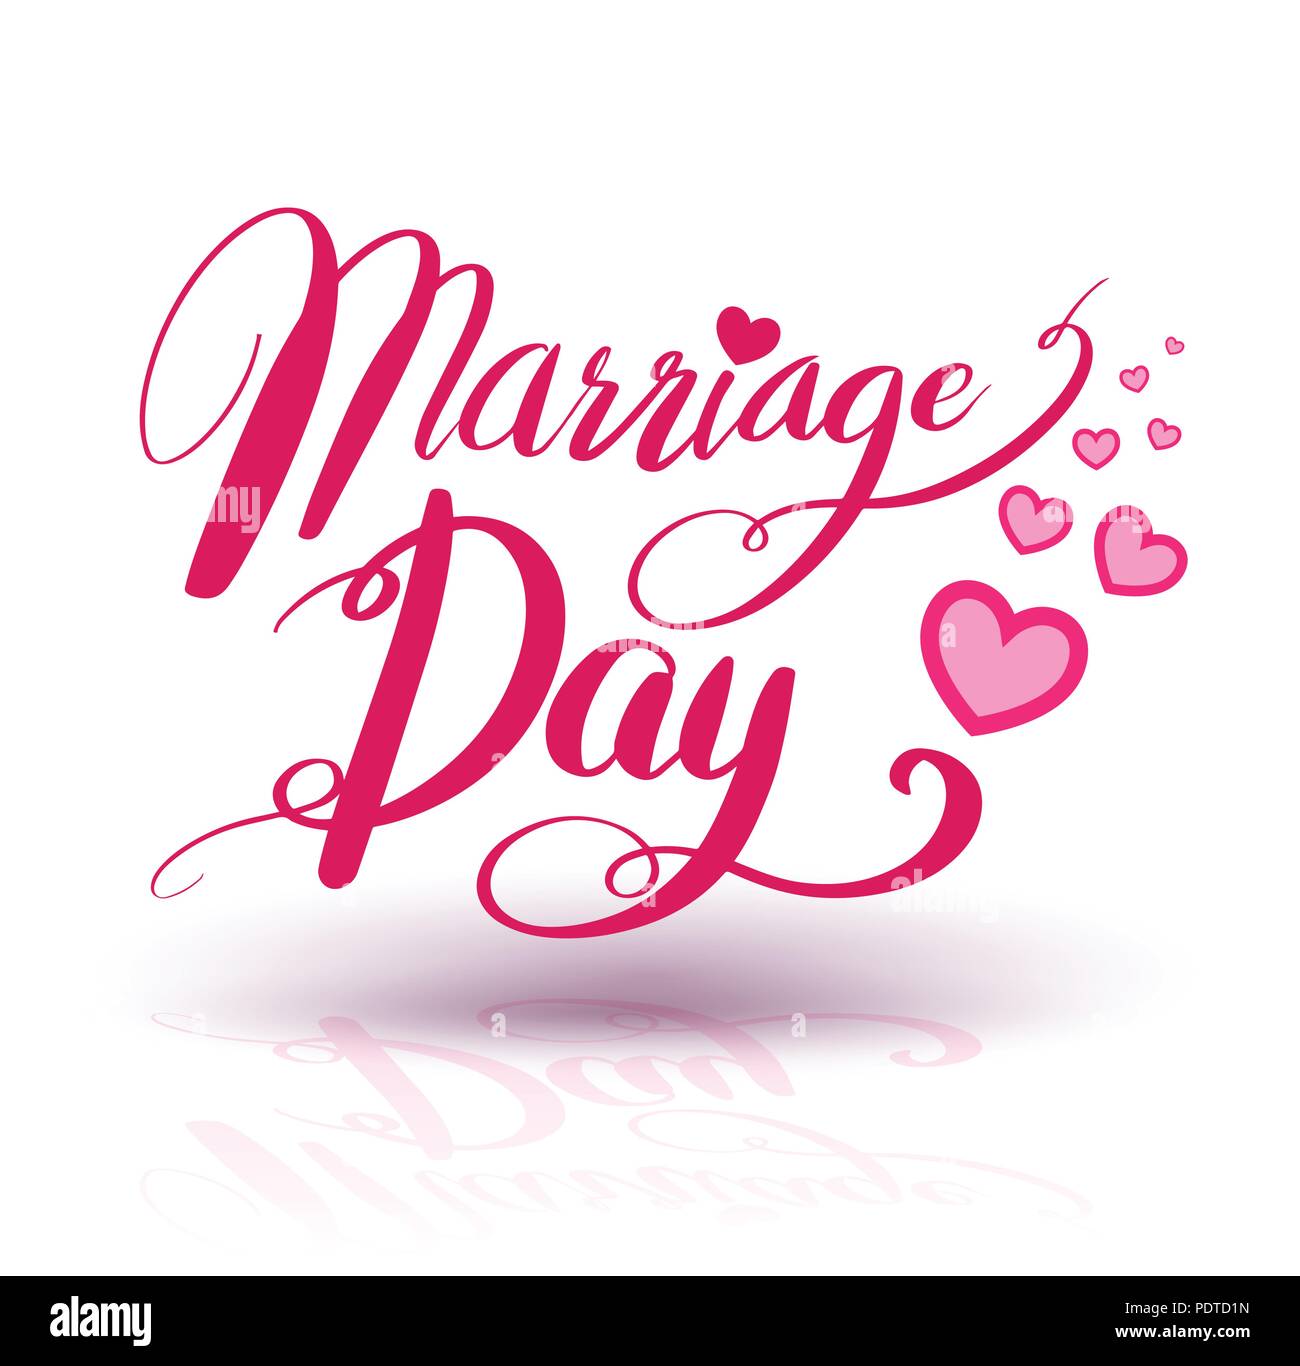 marriage day calligraphy heart shaped. lettering vector